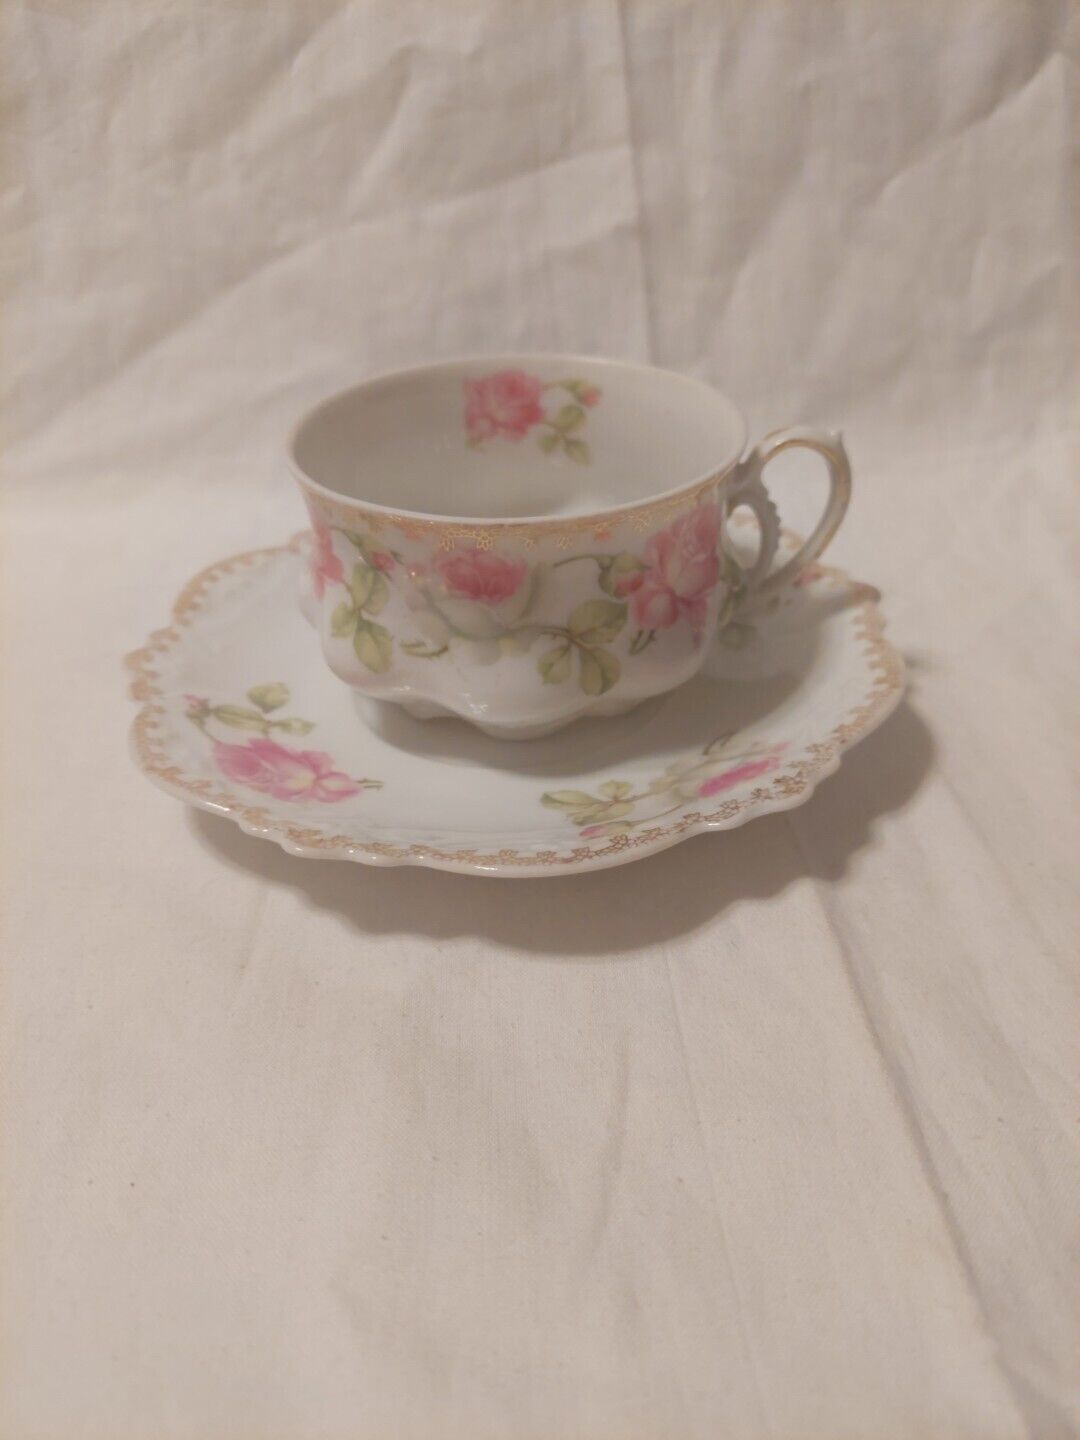 Antique MZ Austria China Tea Cup and Saucer Delicate Porcelain Pink Flowers